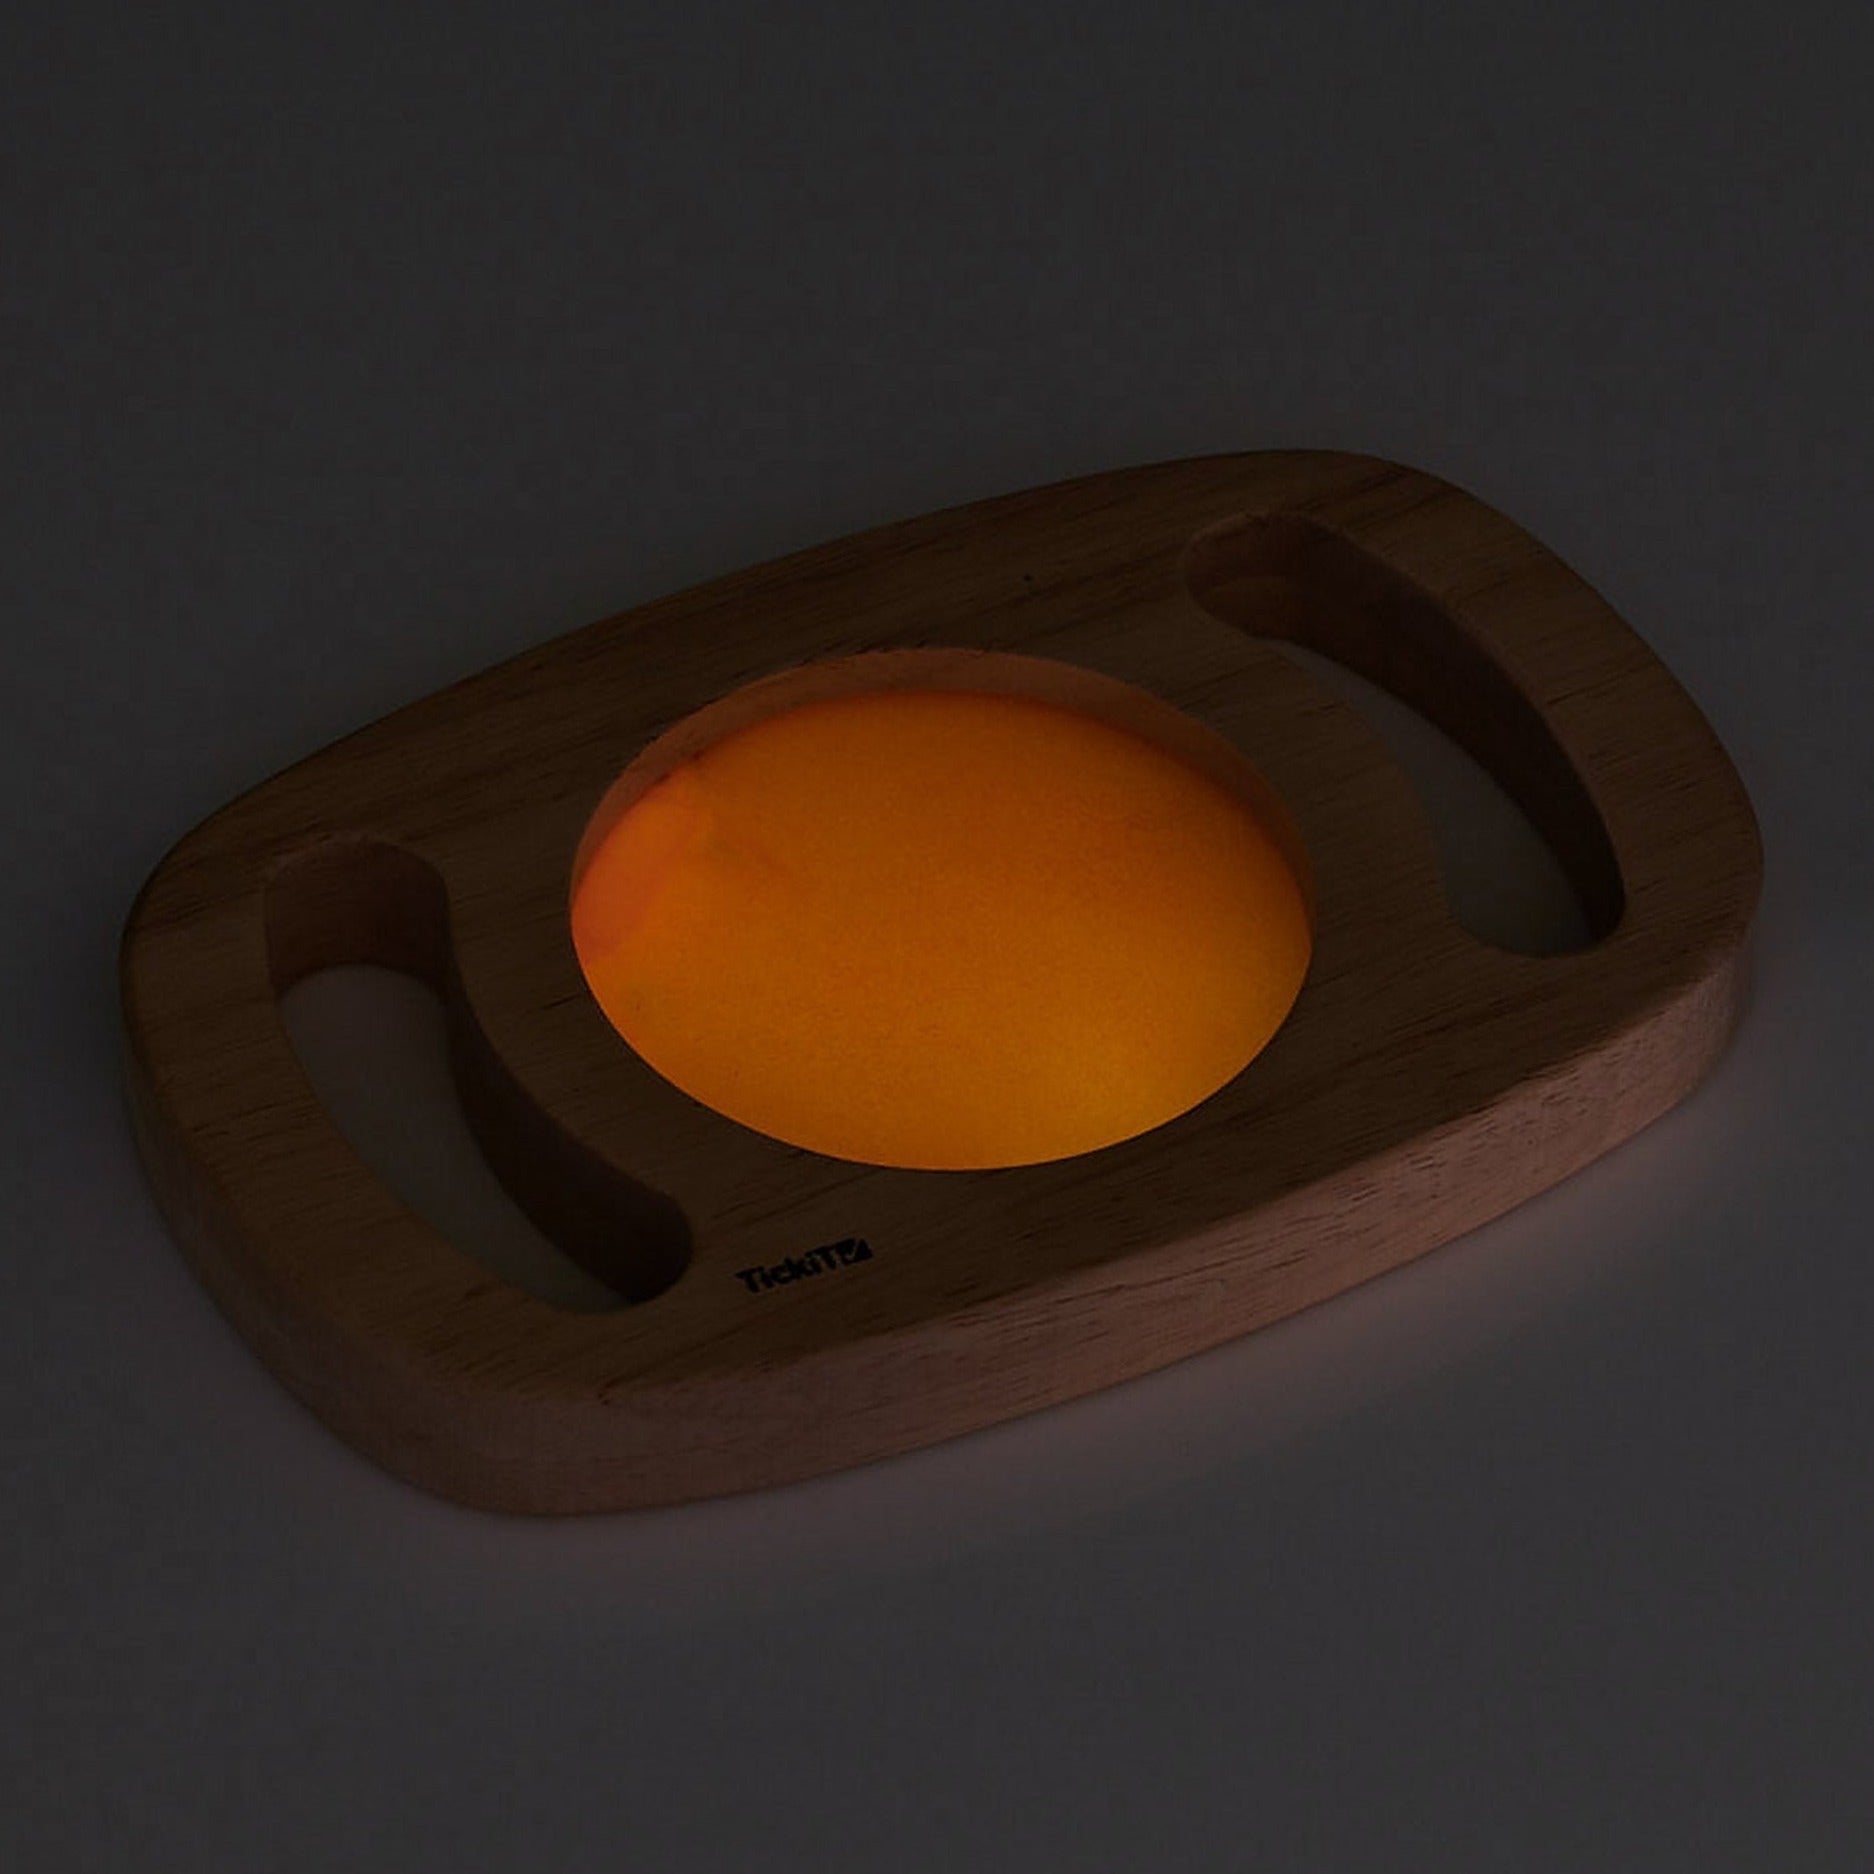 Easy Hold Glow Panel Orange, The Easy Hold Glow Panel Orange is new to our best-selling Easy Hold range, this beautiful rubberwood frame with easy grip handles contains a fascinating glow in the dark panel. The Easy Hold Glow Panel Orange is activated by leaving in bright light, when taken into a dark den it magically glows in vibrant orange. Children will love to watch the glowing liquid swirl and flow as they twist and turn the panel. The luminescent orange panel offers a new magical, vibrant and sensory 